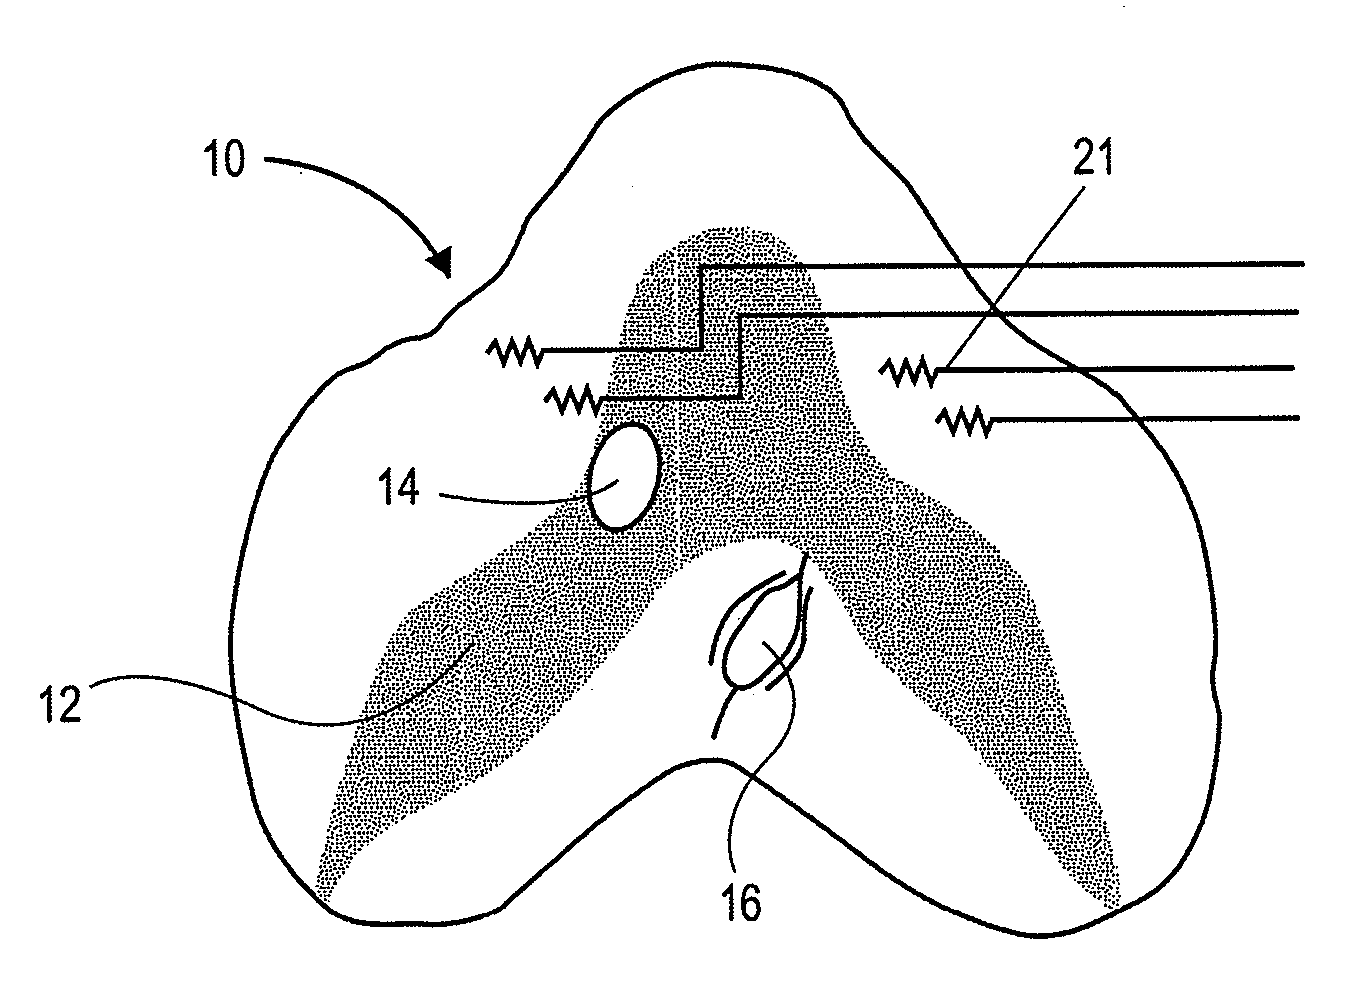 Devices and methods for assessing motor point electromyogram as a biomarker